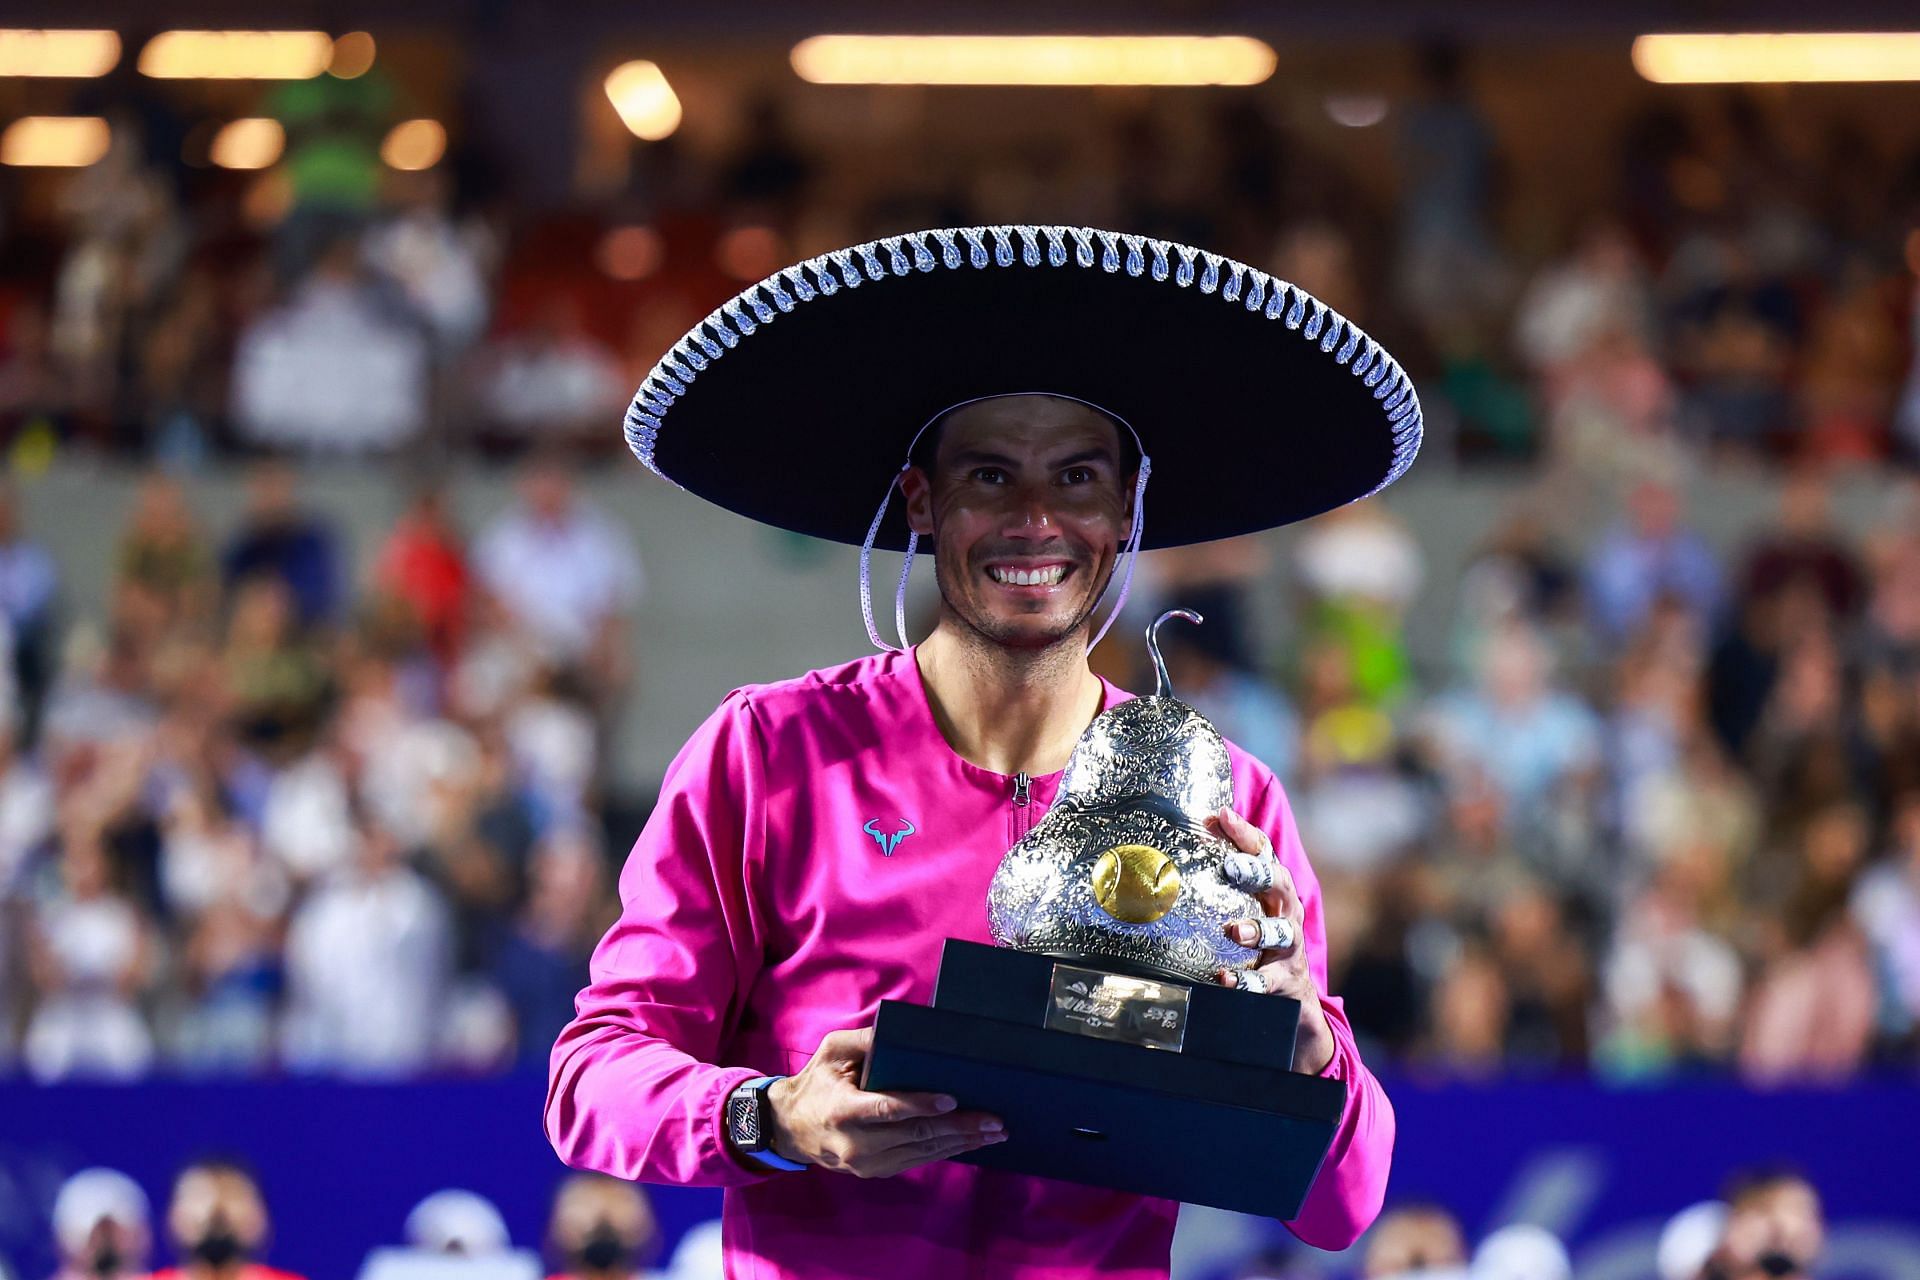 Nadal at the 2022 Abierto Mexicano Telcel